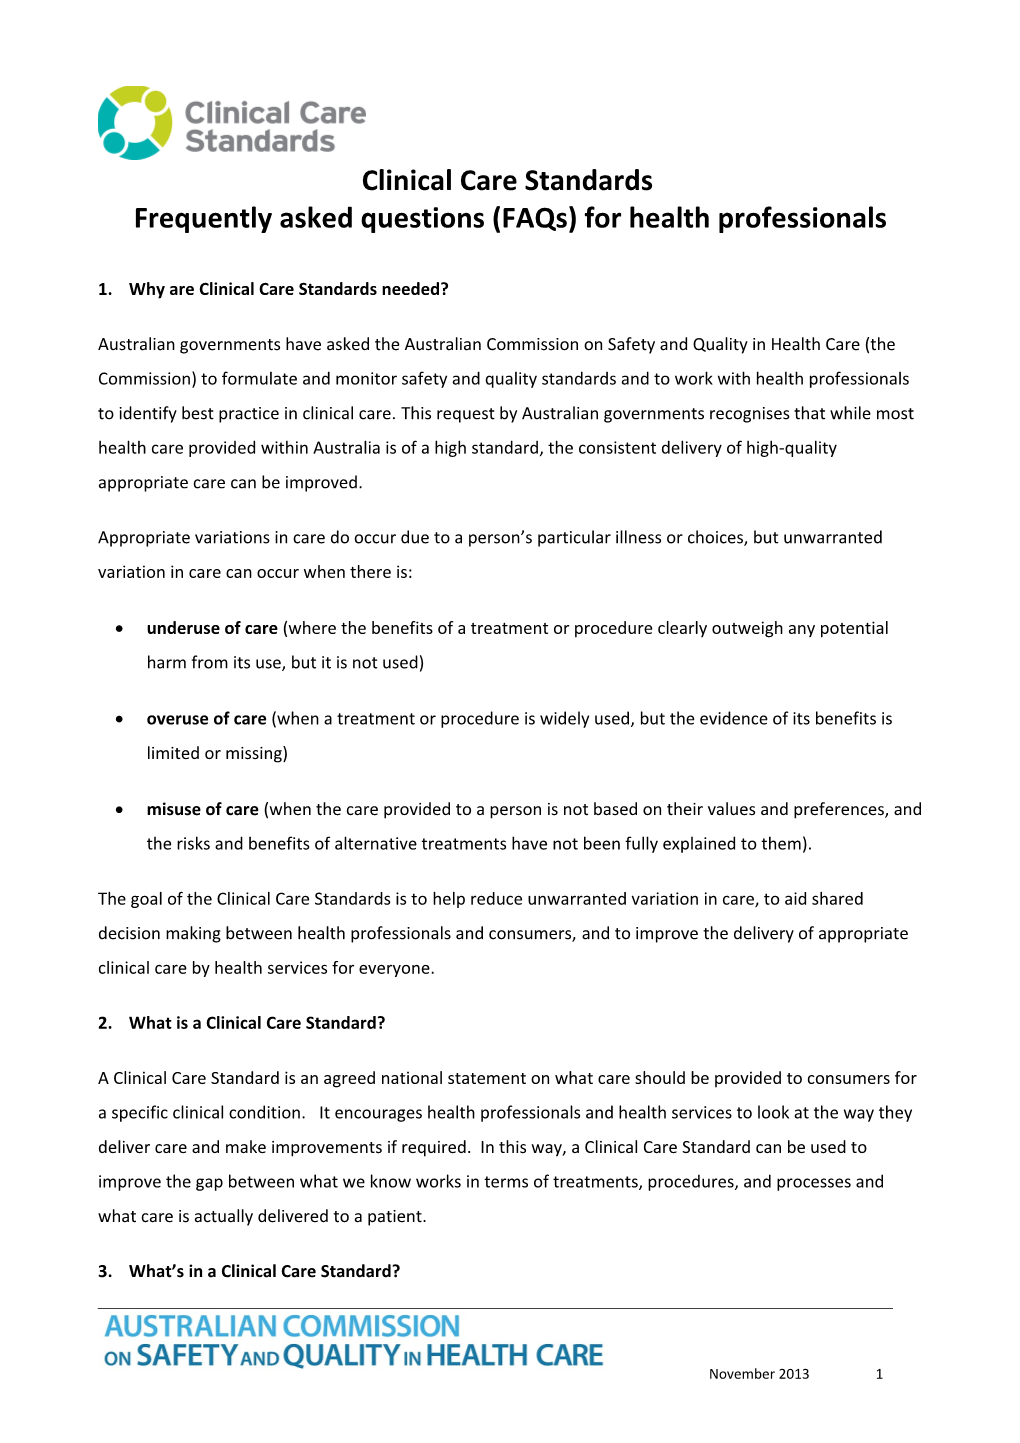 Clinical Care Standards Frequently Asked Questions (Faqs) for Health Professionals